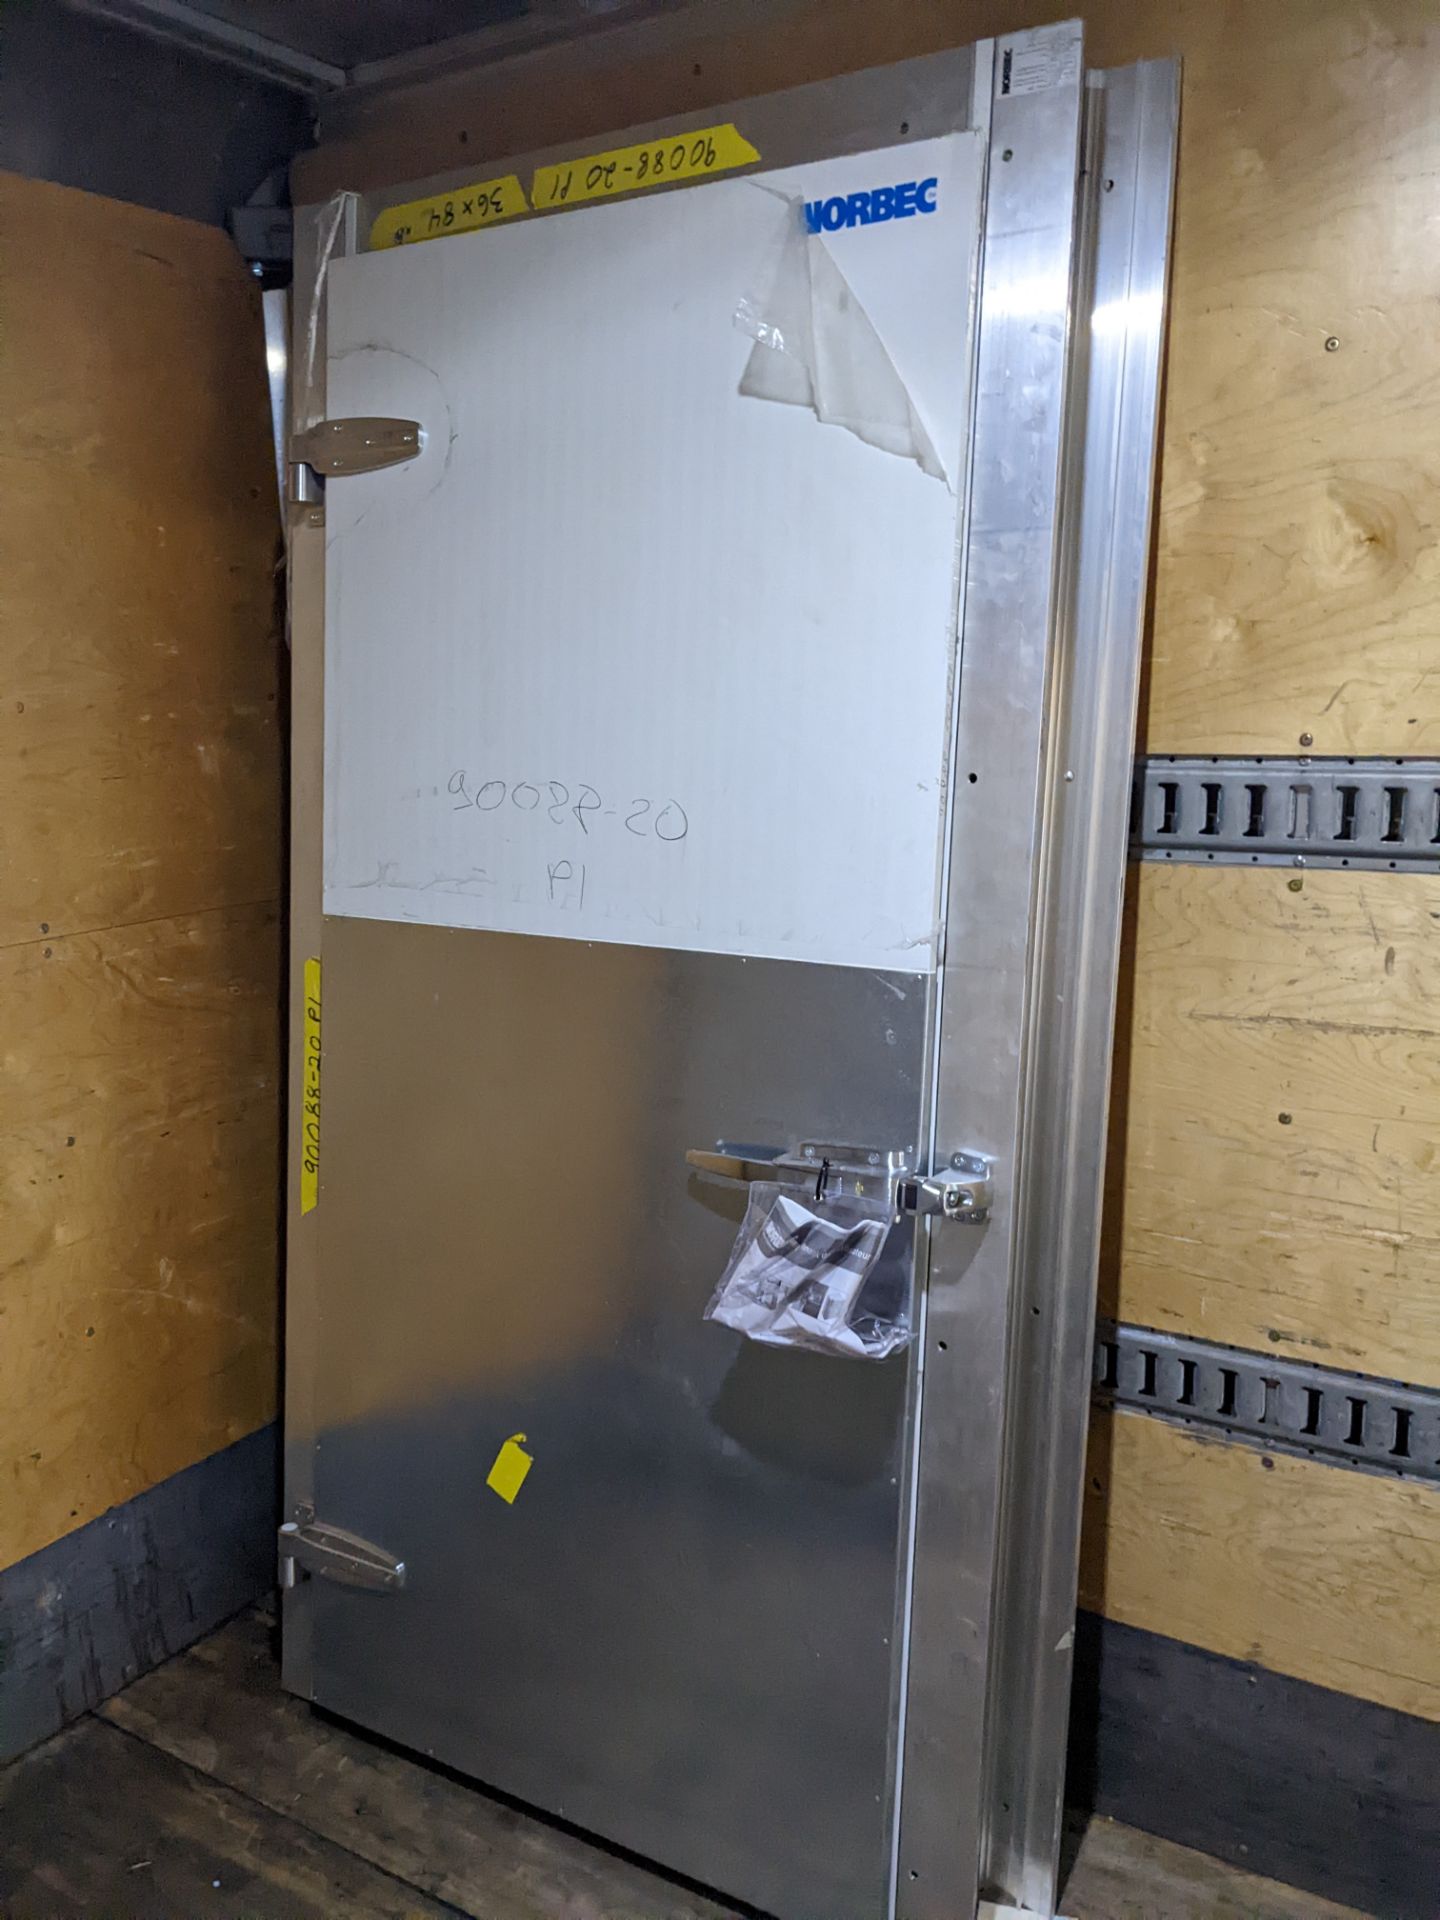 Norbec Walk in Cooler Door and Frame - Seems to be unused